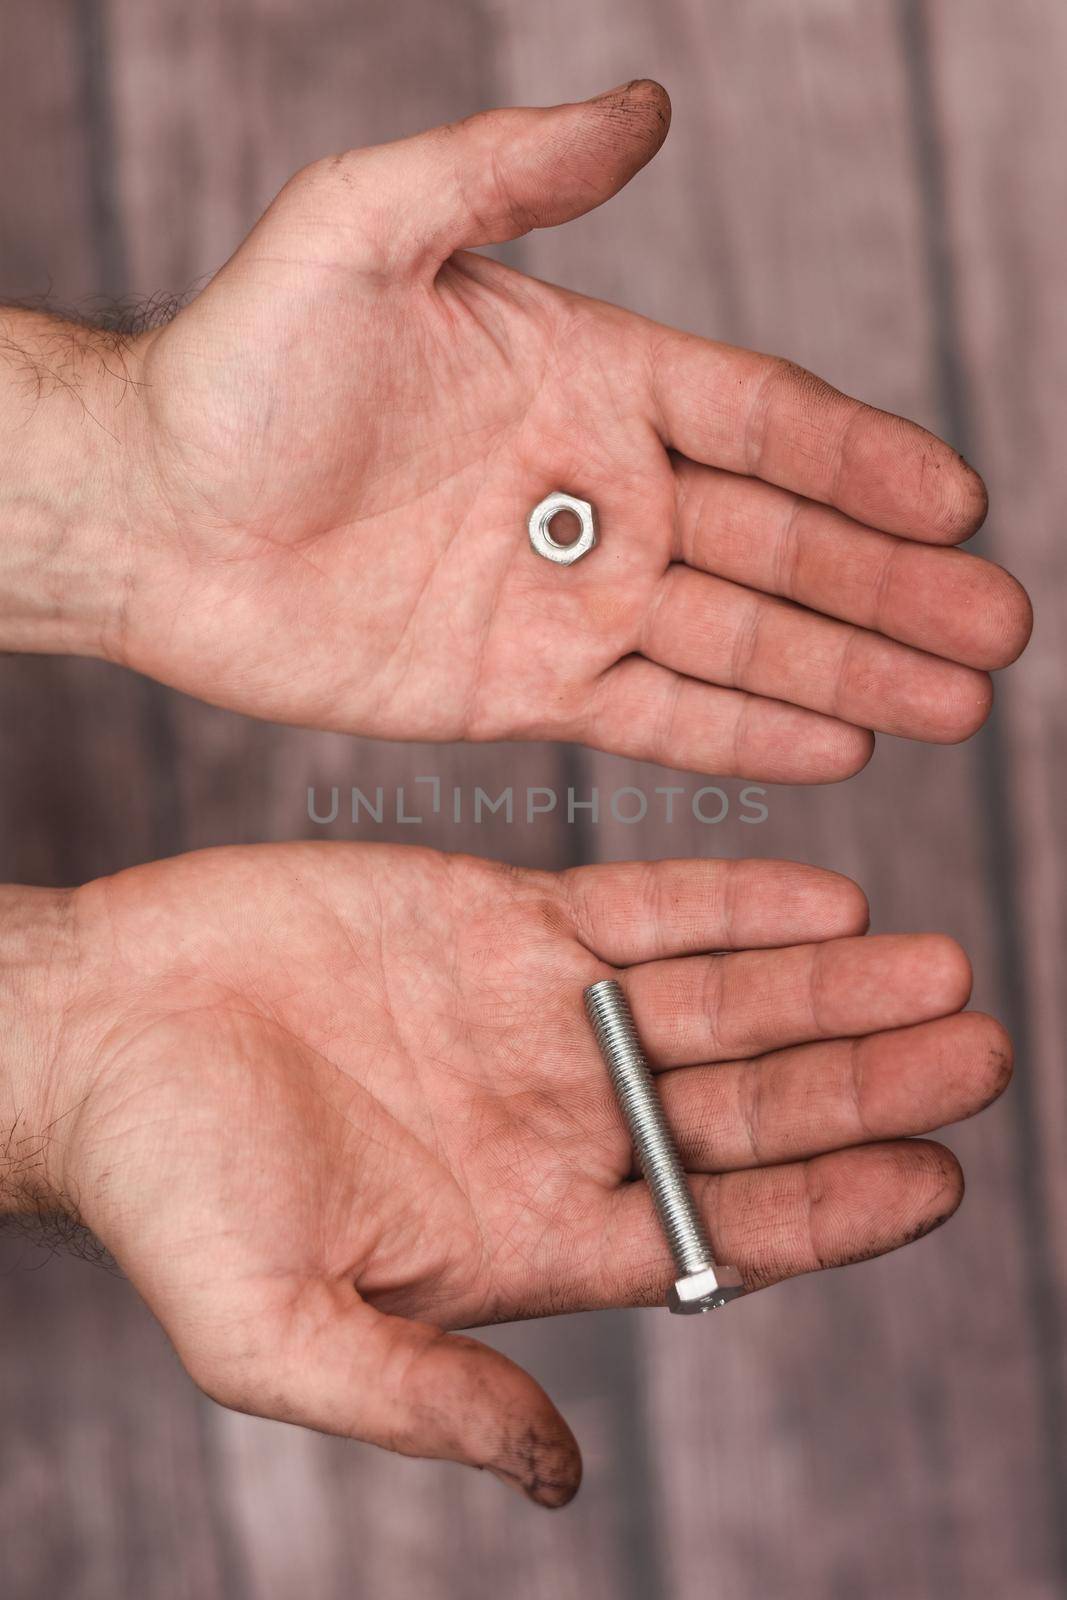 Bolt and nut in men's hands on a wooden background. Close-up. The worker's hands are dirty.